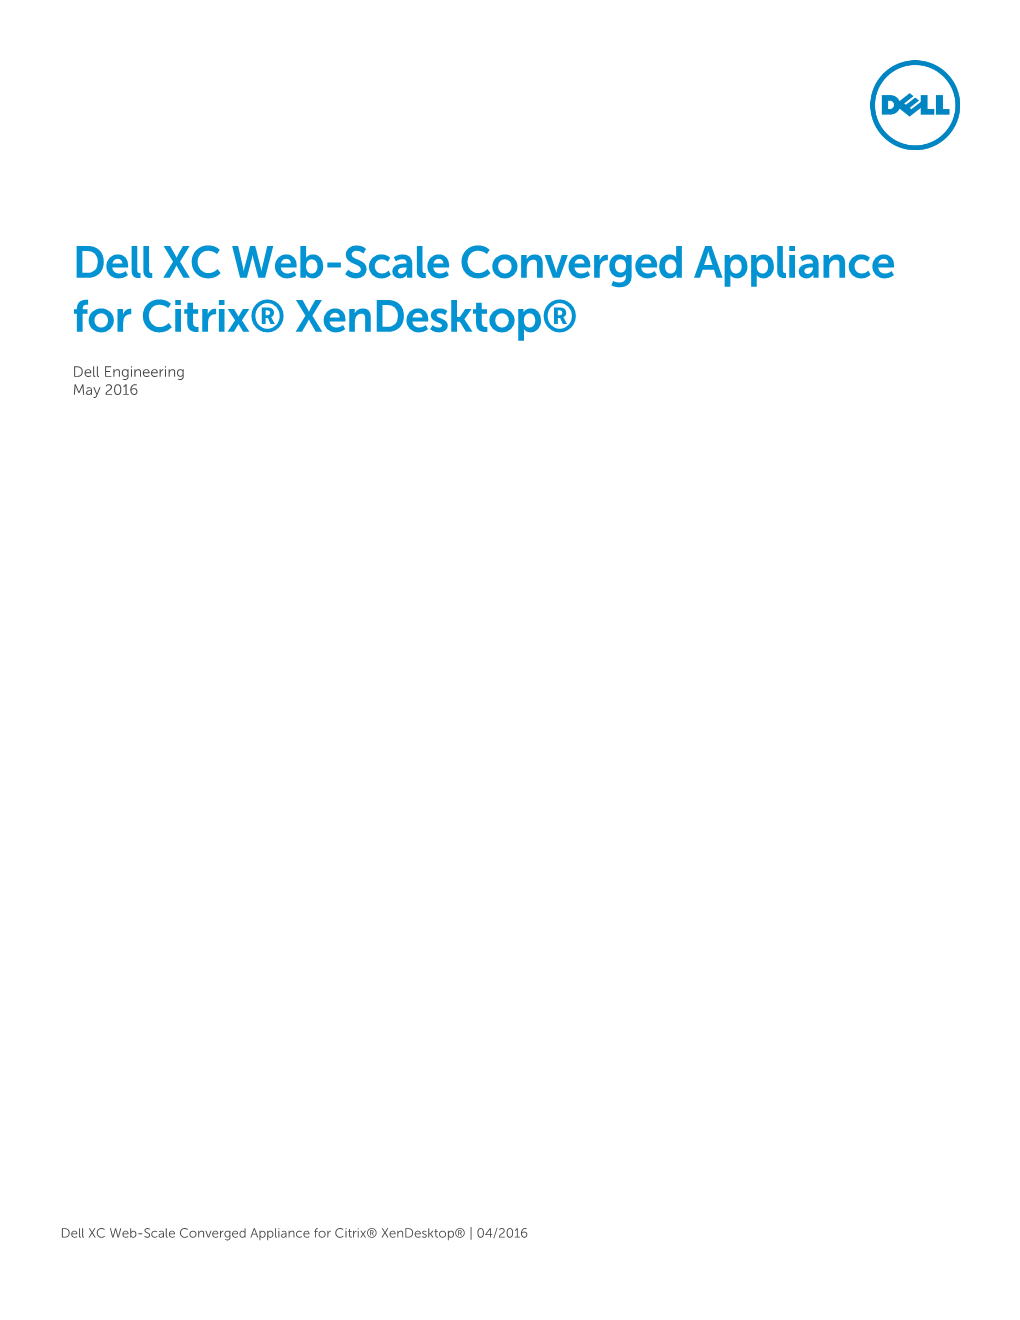 Dell XC Web-Scale Converged Appliance for Citrix® Xendesktop®